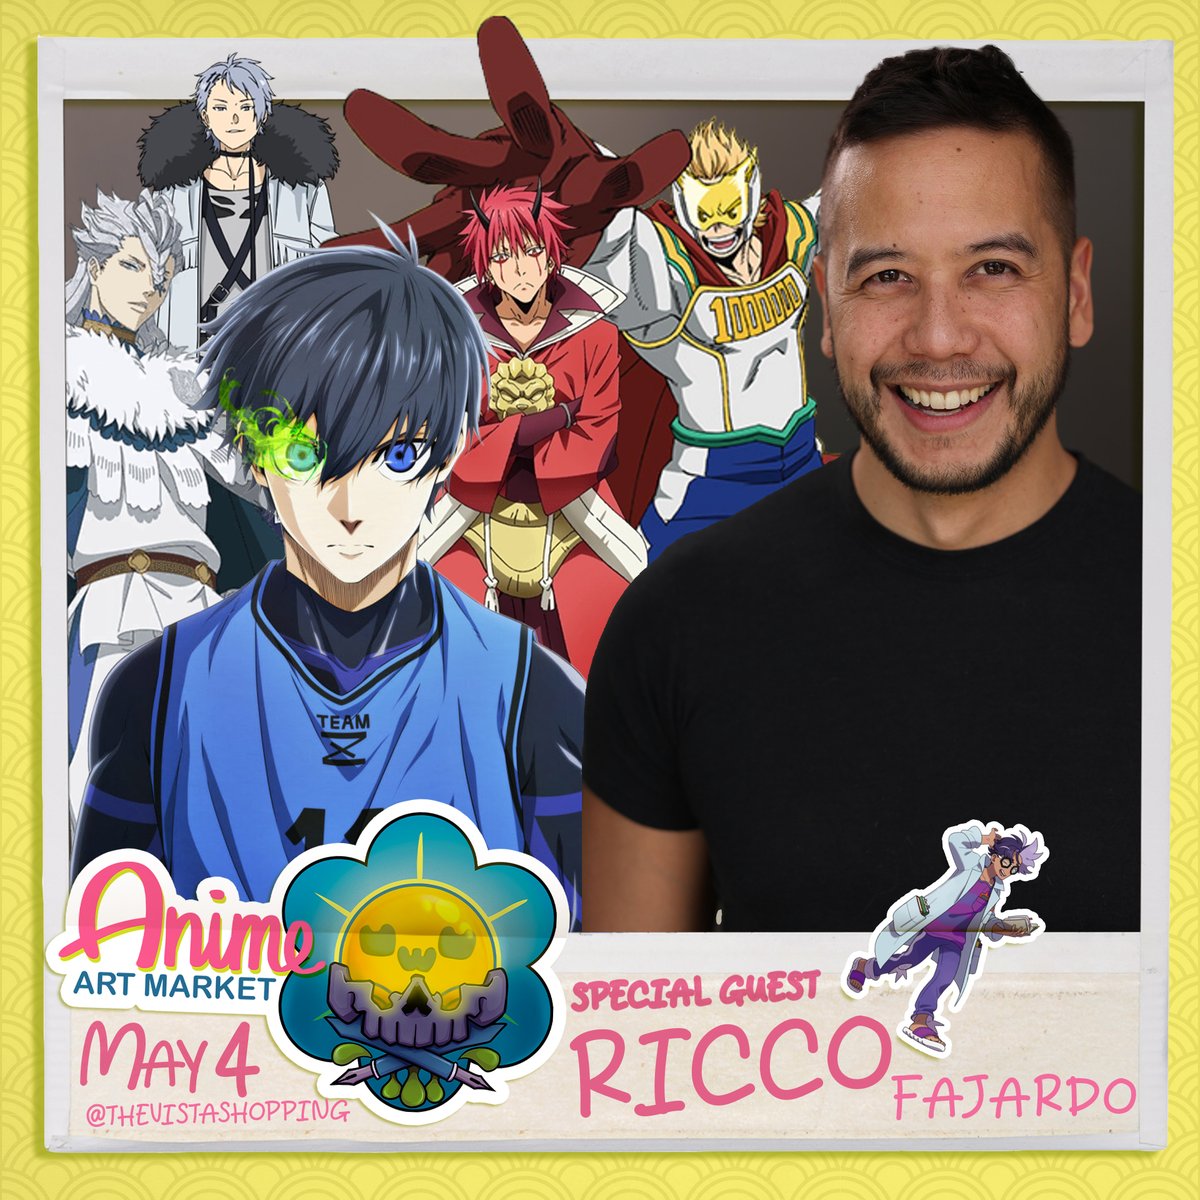 Come see @RiccoFajardo this Saturday on May 4th as a special guest of the our AnimeUwU Art Market at The Vista in Lewisville (the mall formerly known as Vista Ridge or Music City Mall)!